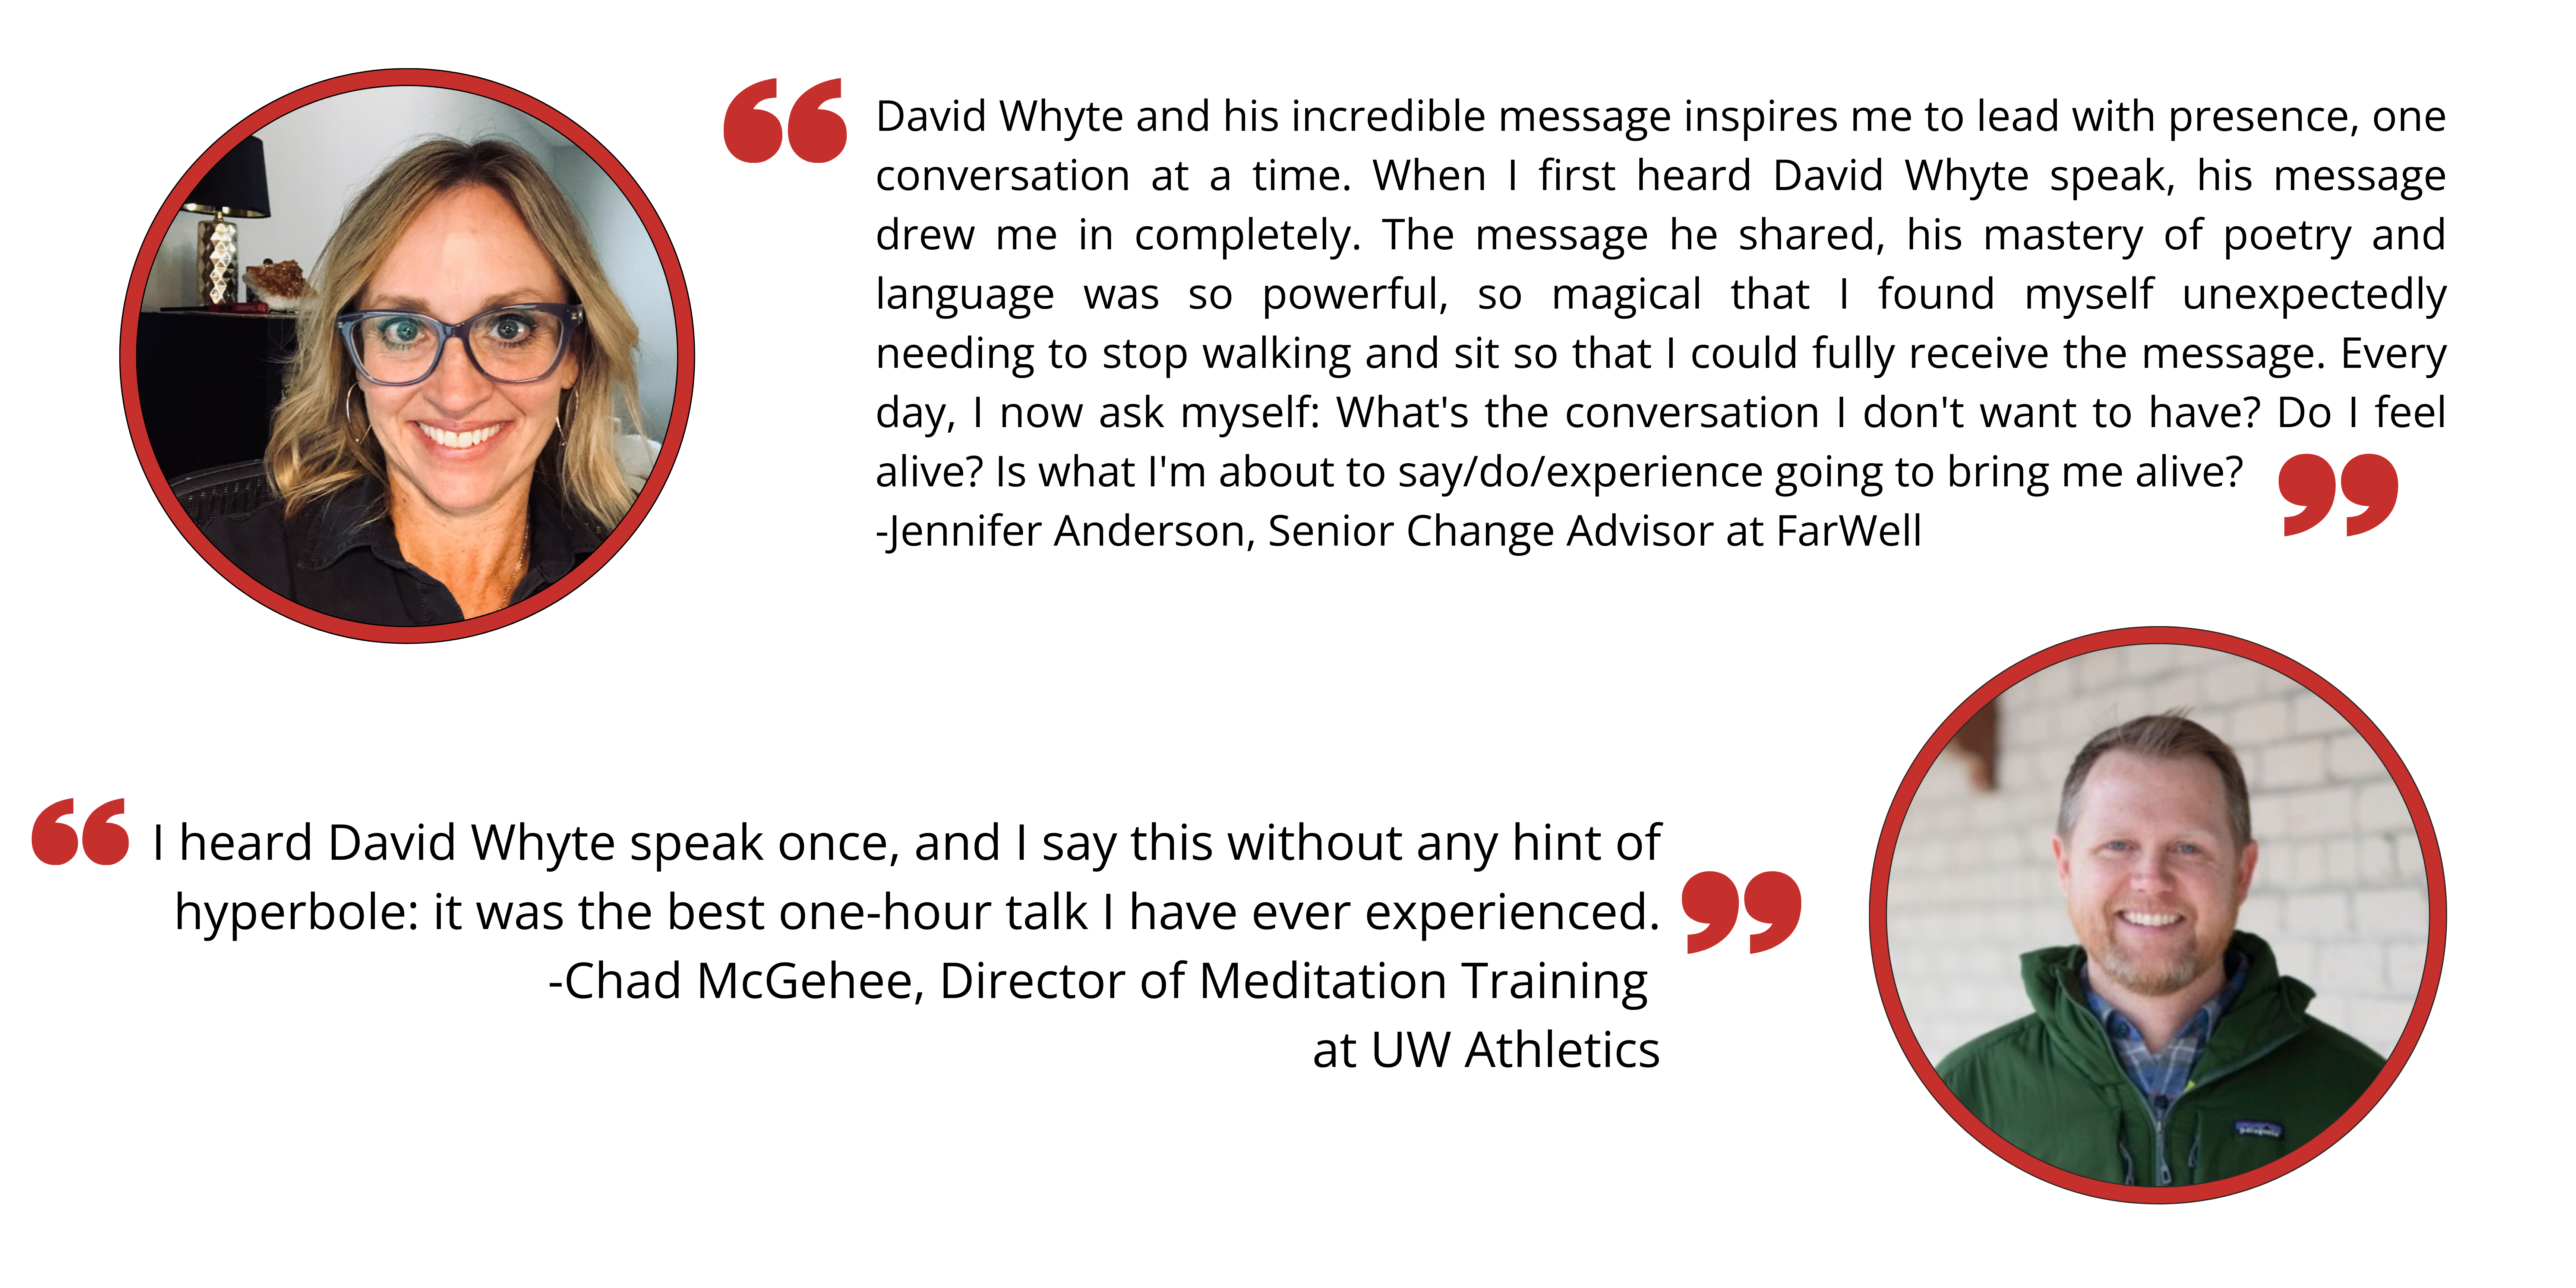 quotes about david whyte from jennifer anderson and chad mcgehee